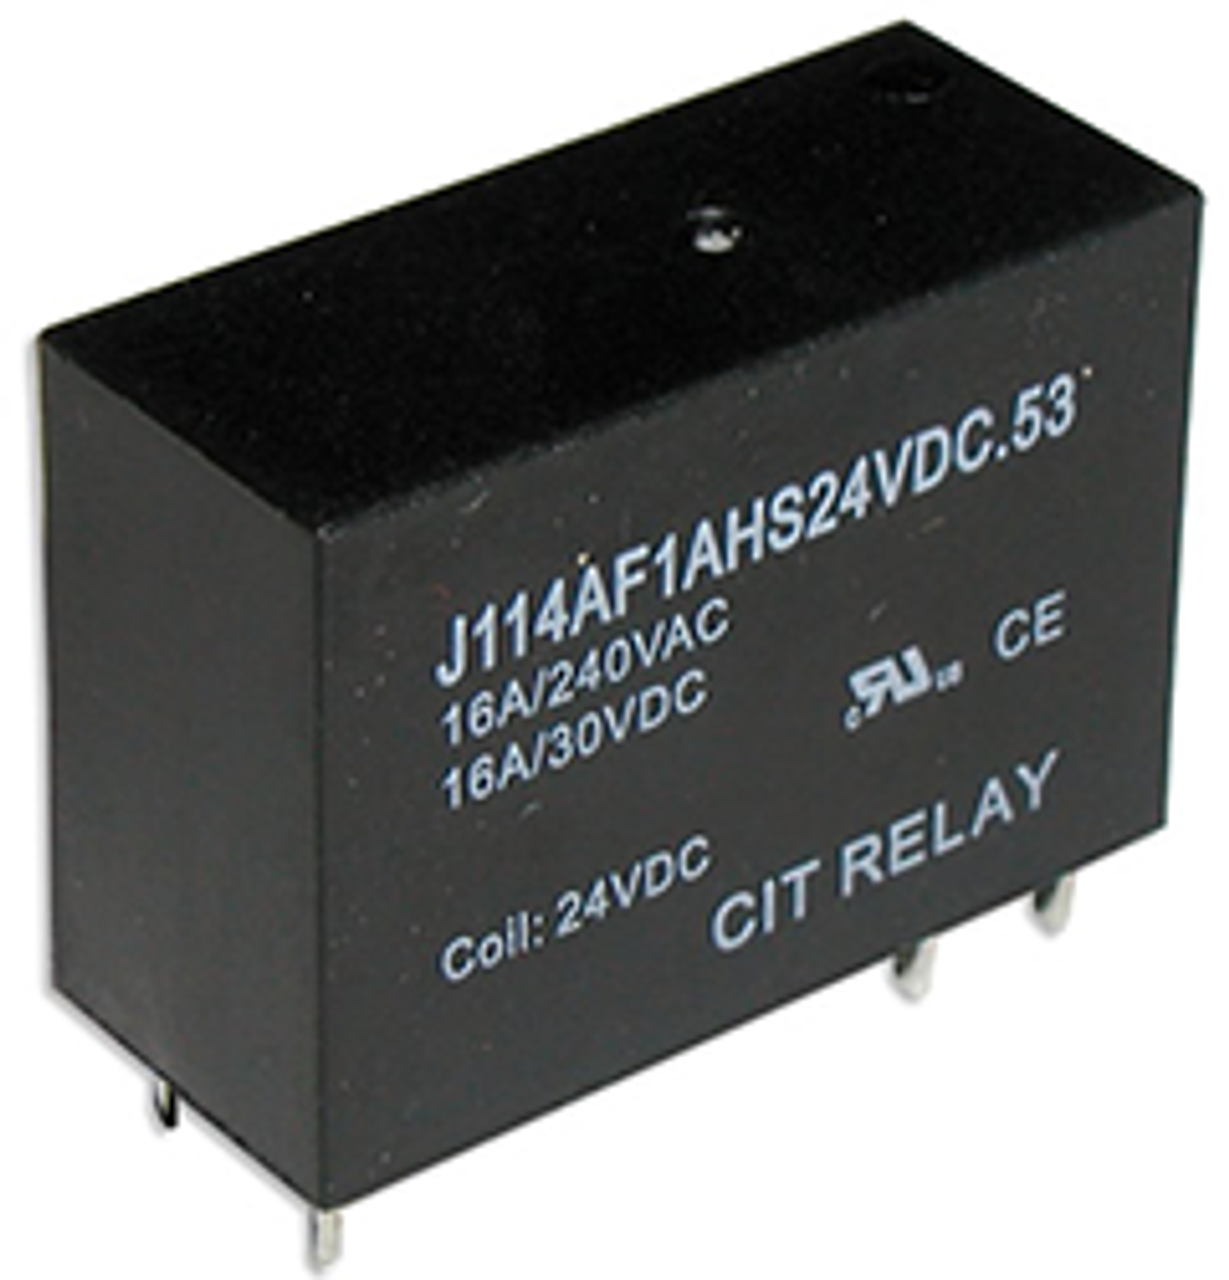 CIT Relay and Switch J114AF1AHS9VDC.53 Power Relays